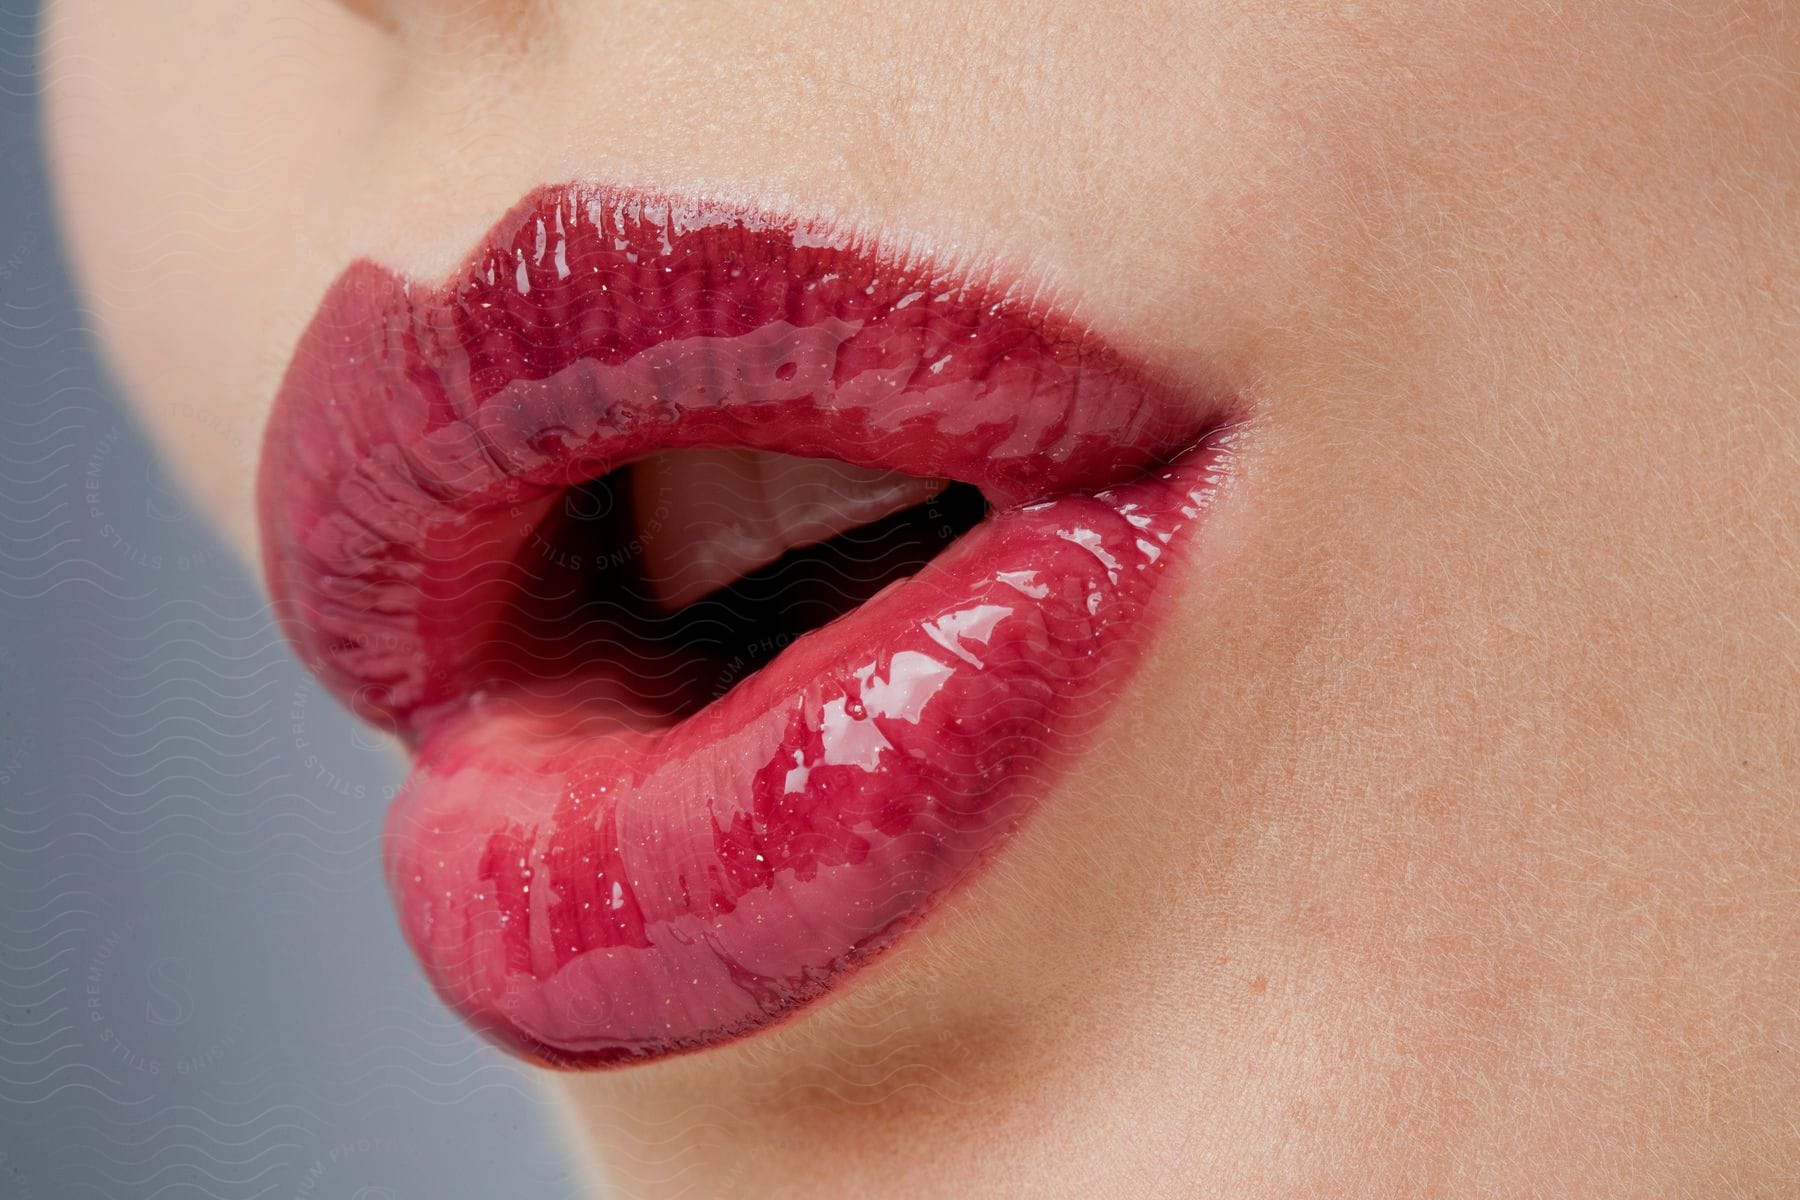 The lips of a person who is using bright red cosmetics and has their mouth partially open